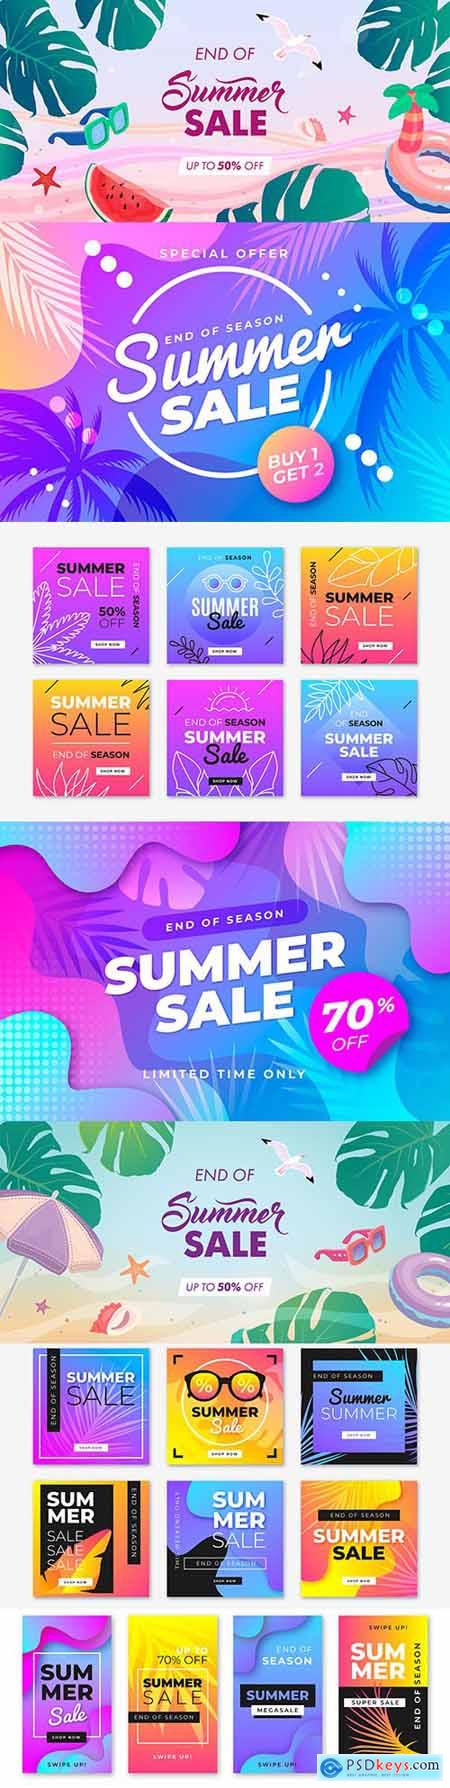 Summer sale at the end of season instagram post set